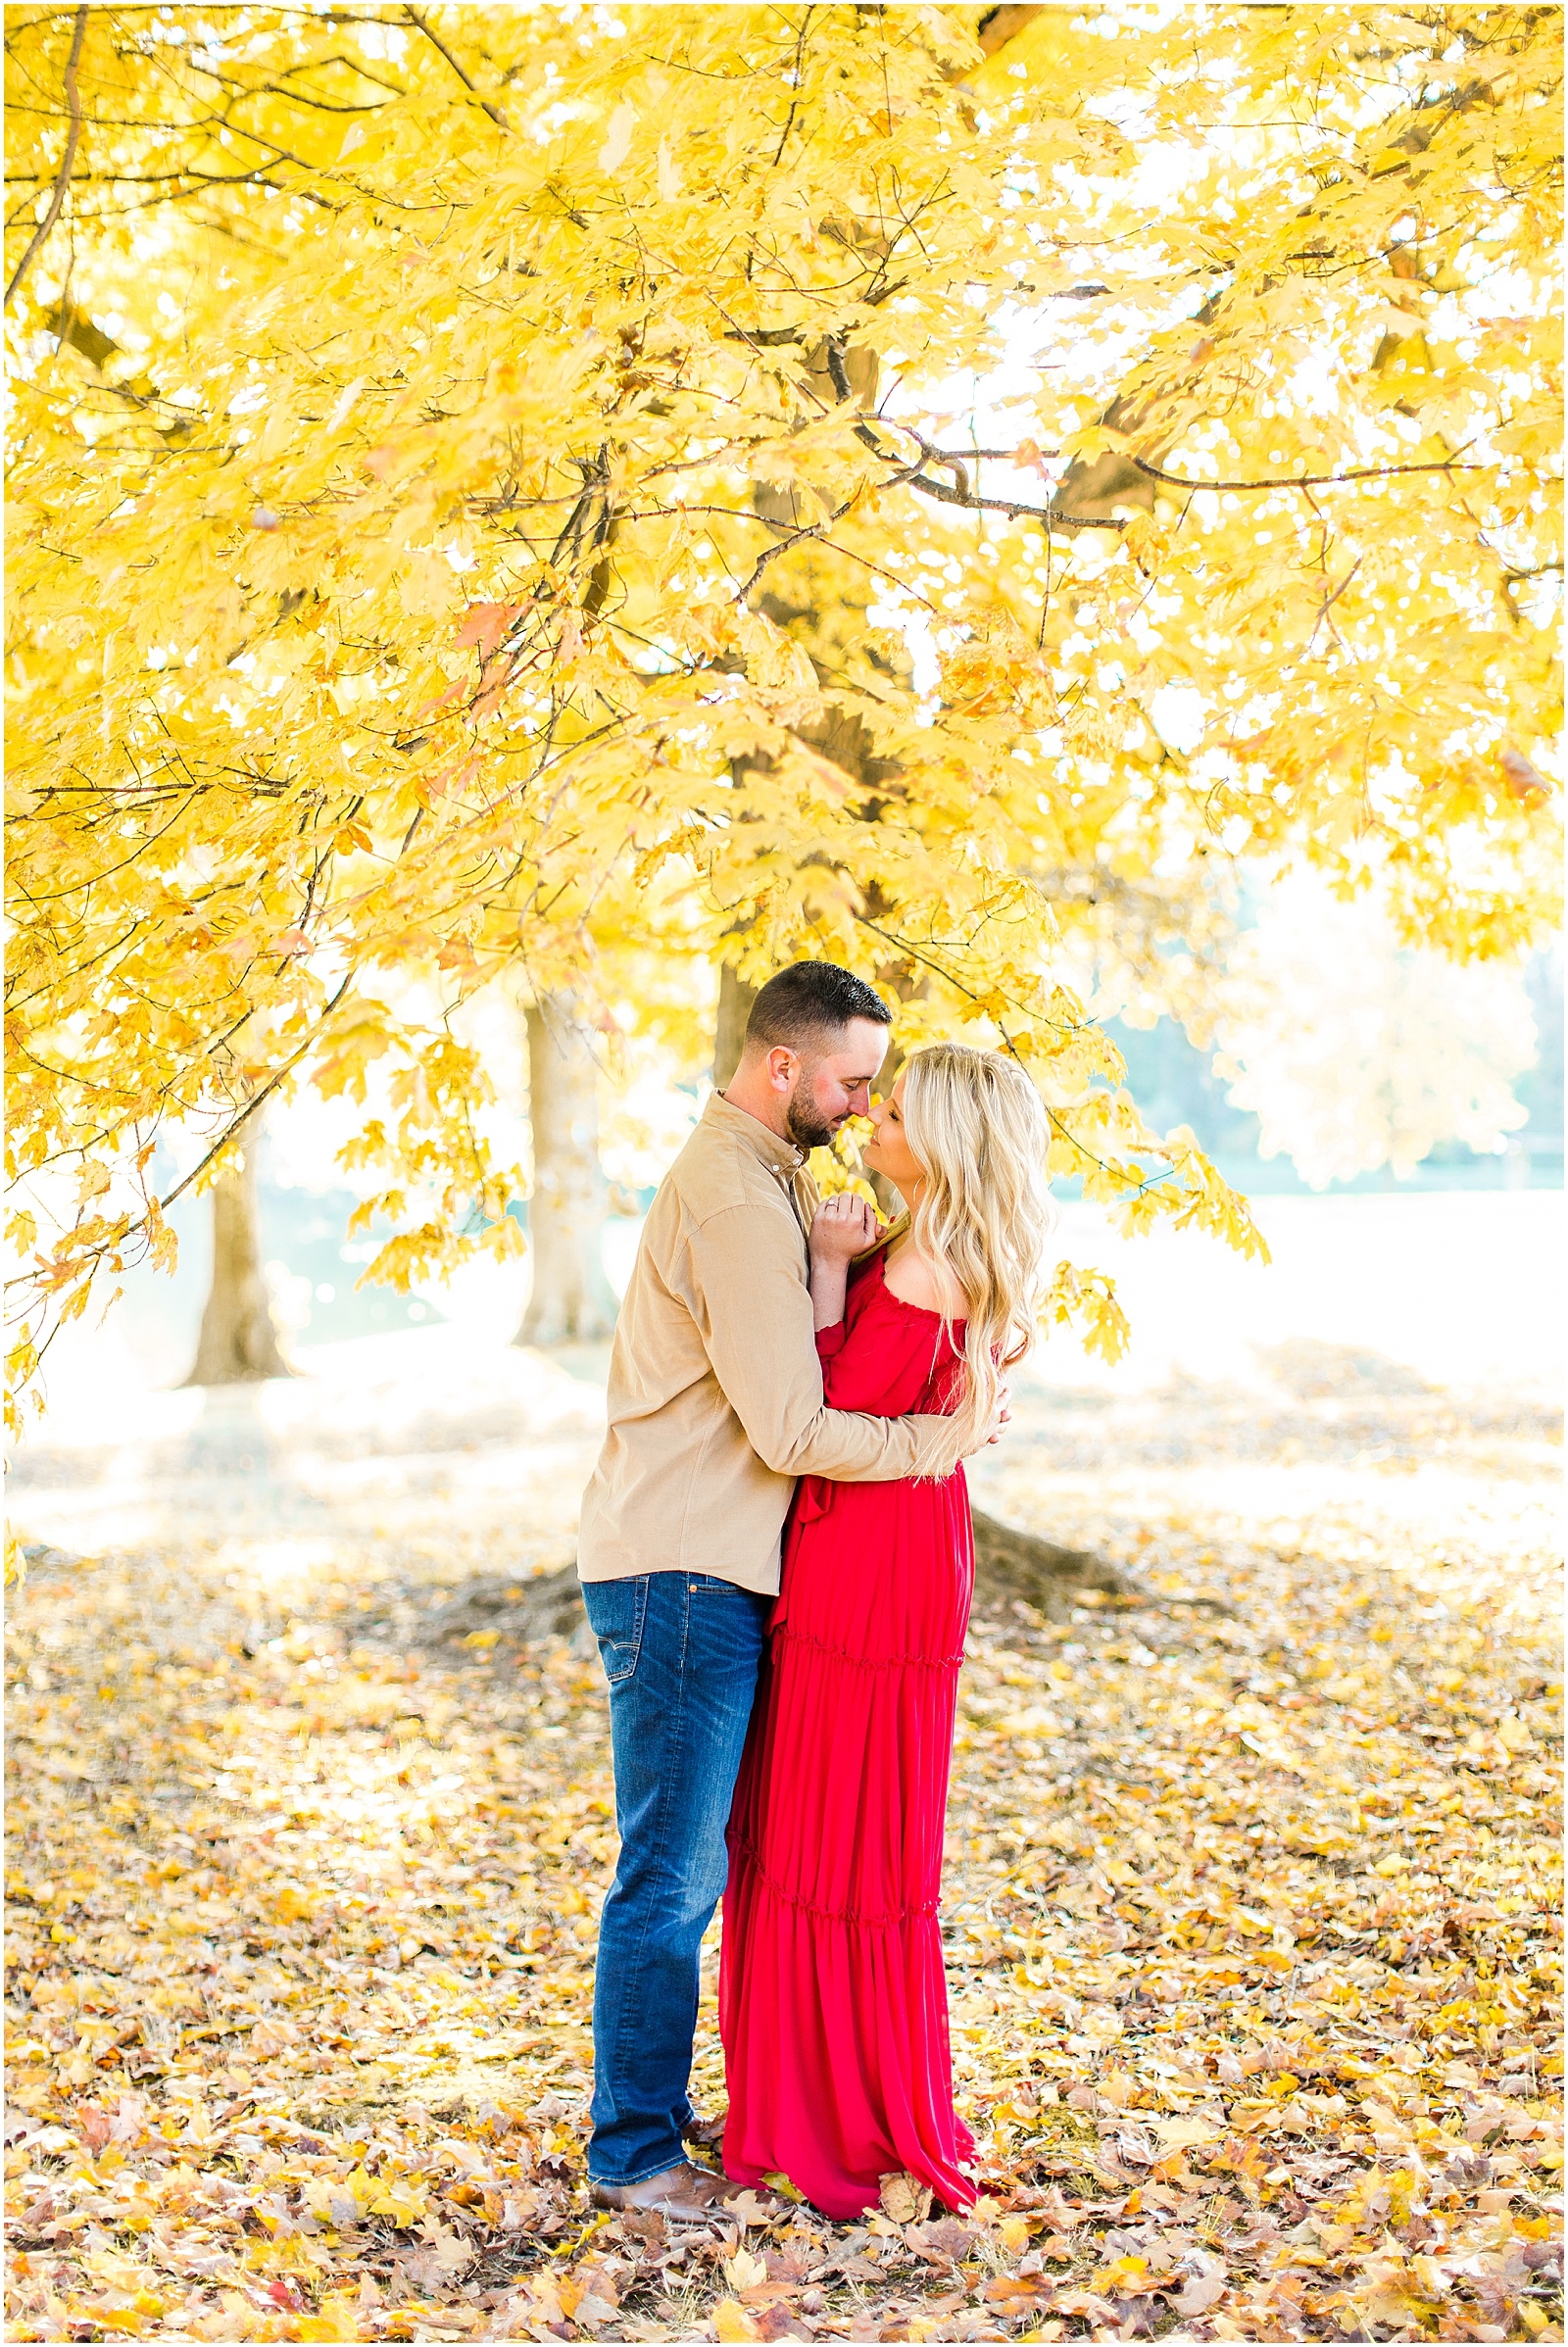 A Southern Indiana Engagement Session | Charleston and Erin | Bret and Brandie Photography032.jpg